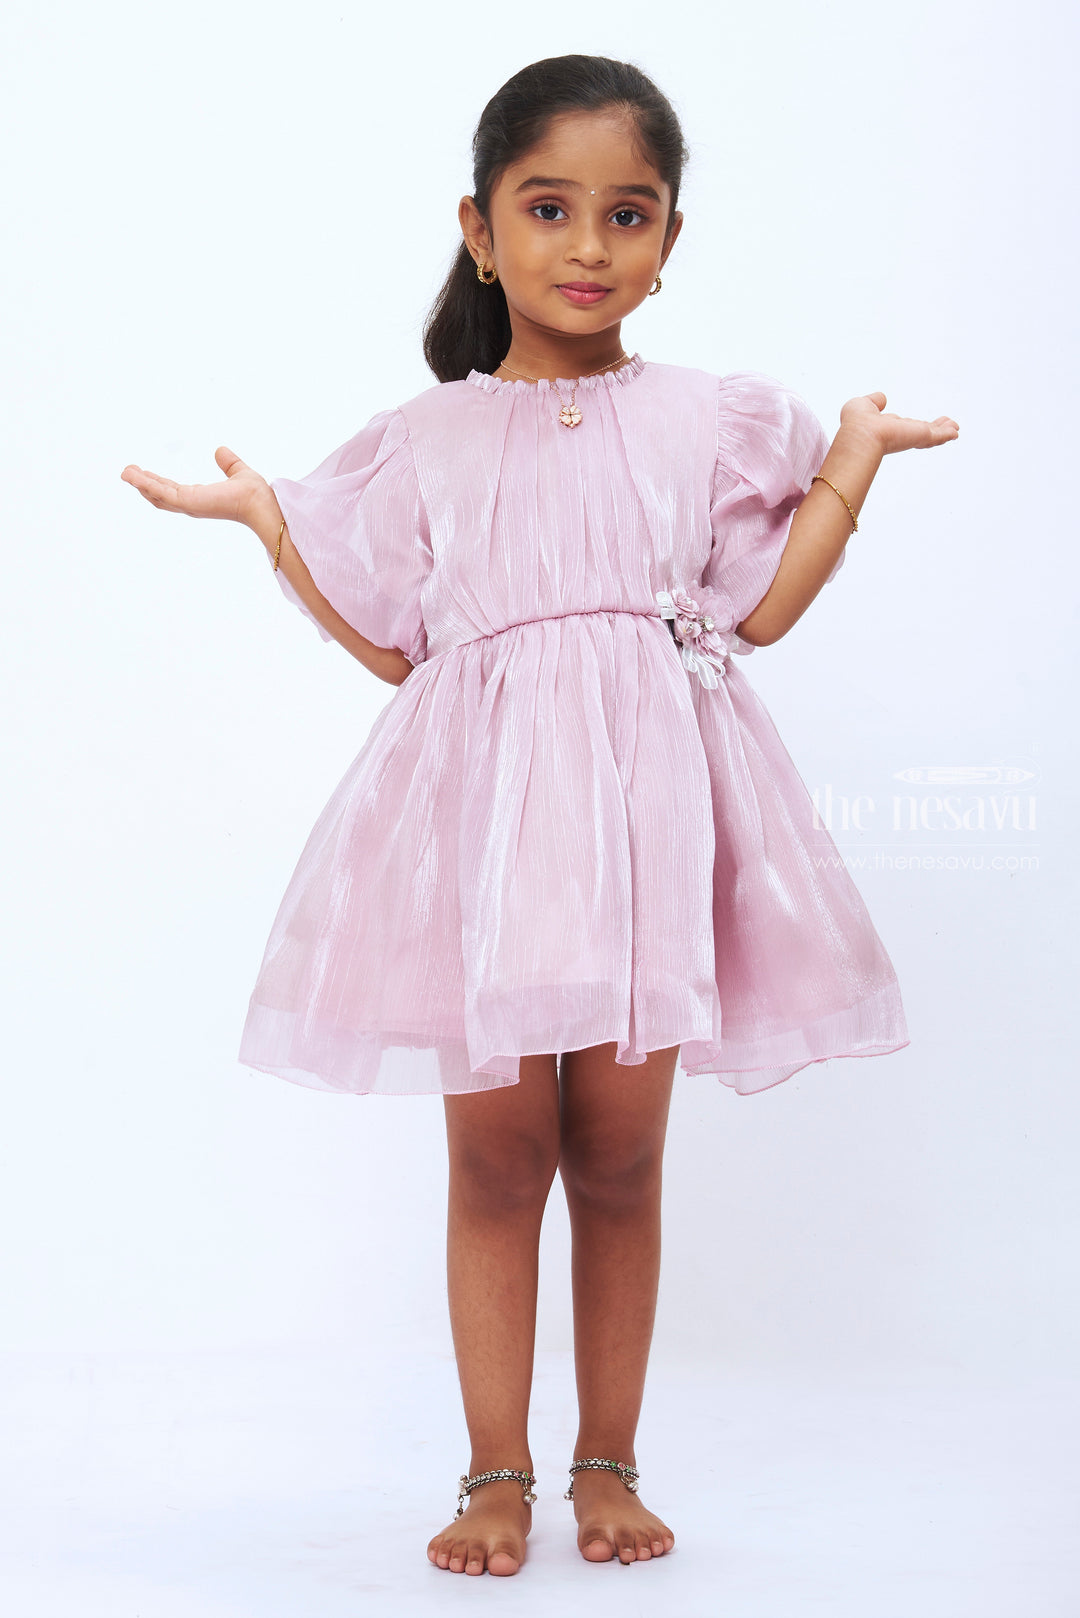 The Nesavu Girls Fancy Party Frock Enchanted Unicorn Party Frock for Baby Girls  First Birthday Boutique Outfit Nesavu Baby Girl Frock Party Wear | Unicorn Birthday Dress | Boutique Outfits | The Nesavu